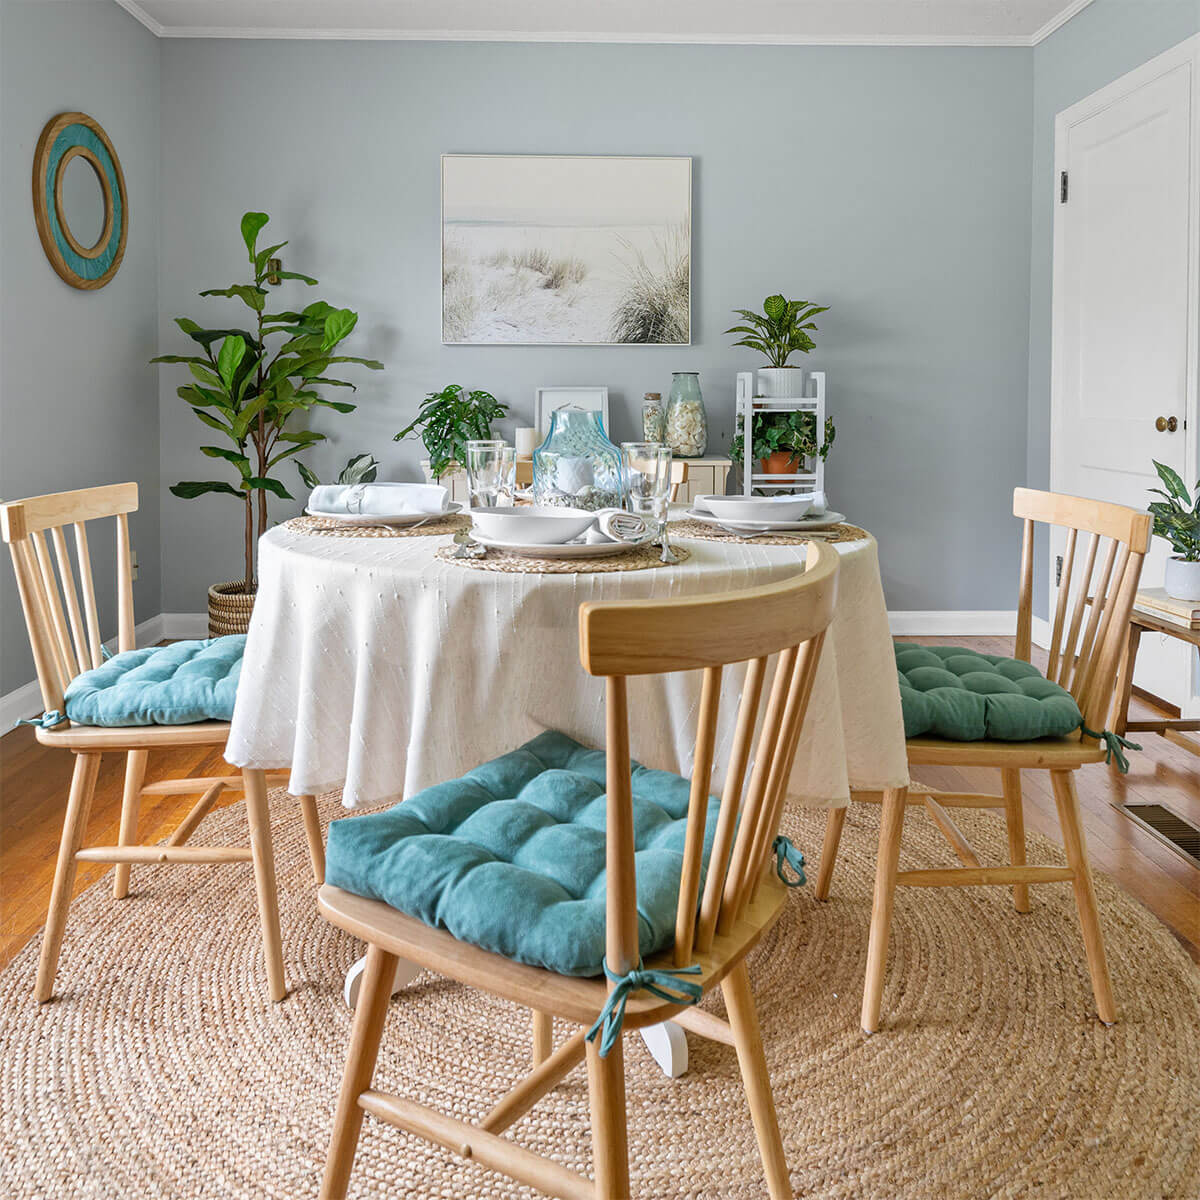 aqua dining chair cushions on natural dining chairs in coastal dining room